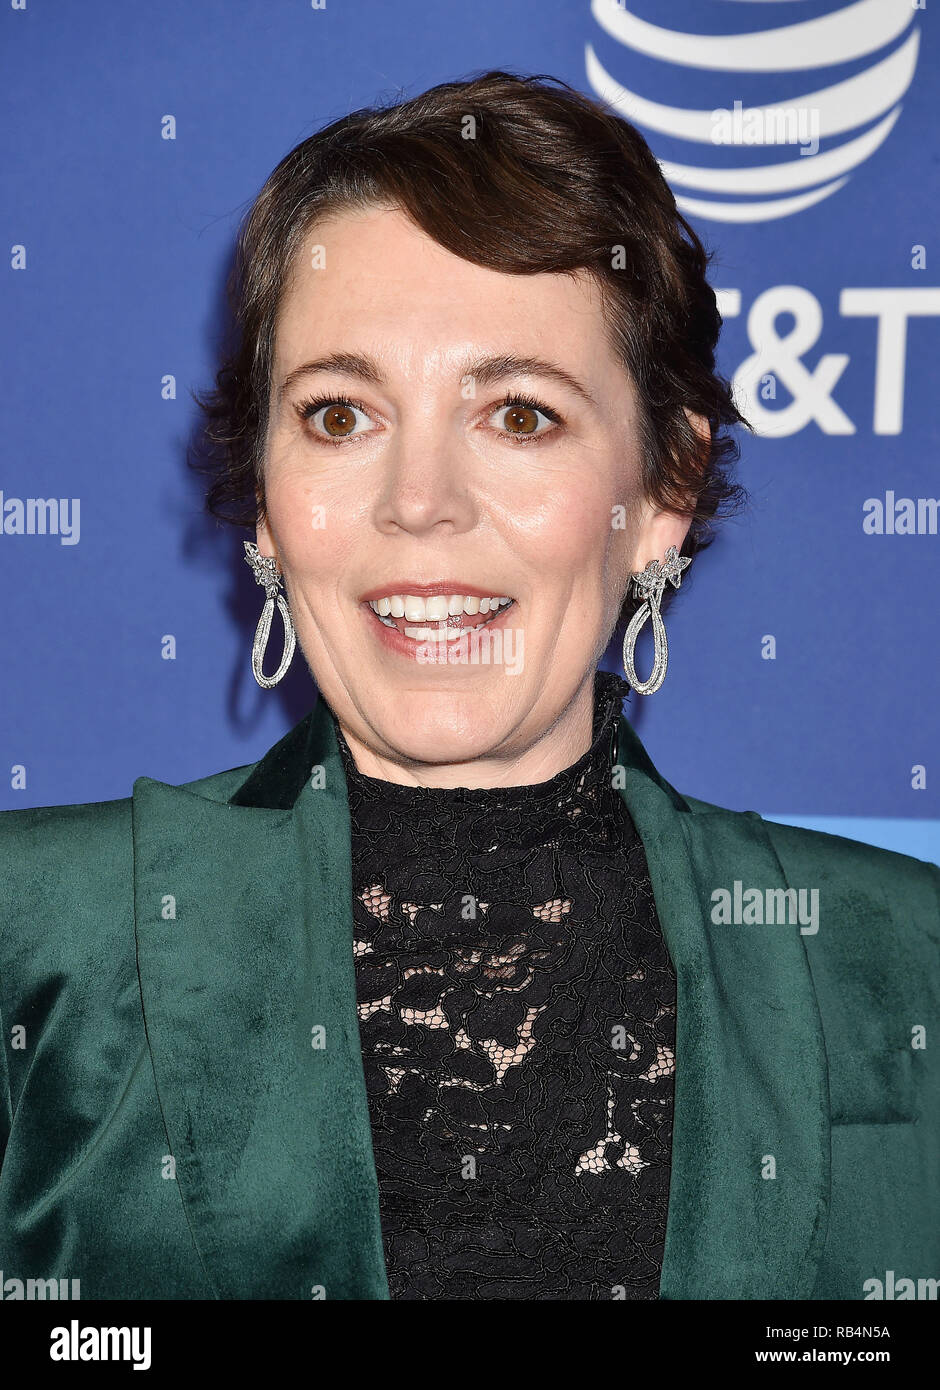 OLIVIA COLEMAN Engloish film actress at the 30th Annual Palm Springs International Film Festival Film Awards Gala at Palm Springs Convention Center on January 3, 2019 in Palm Springs, California. Photo: Jeffrey Mayer Stock Photo